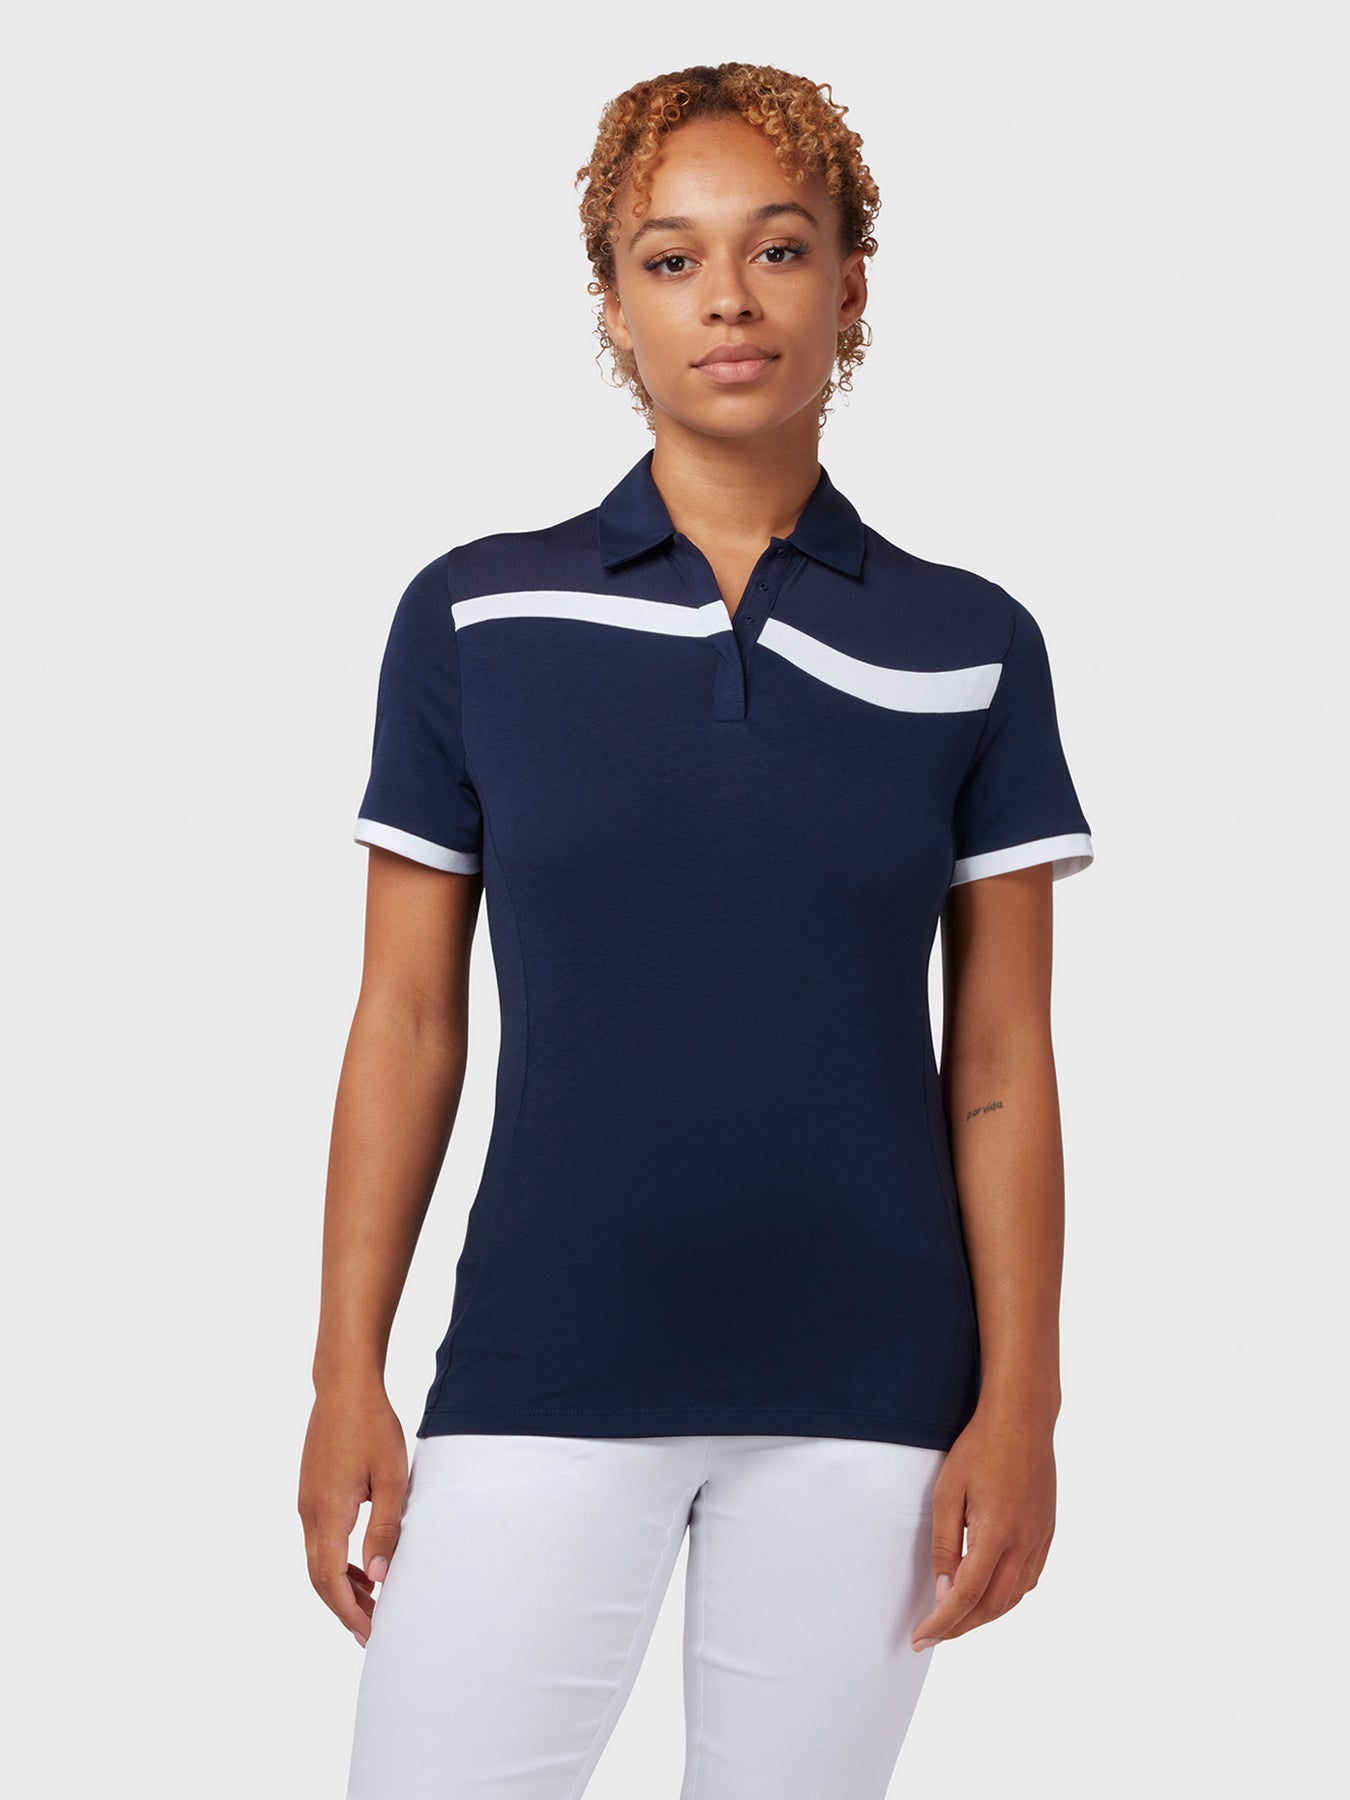 View Colour Block Womens Polo In Peacoat Peacoat XXL information